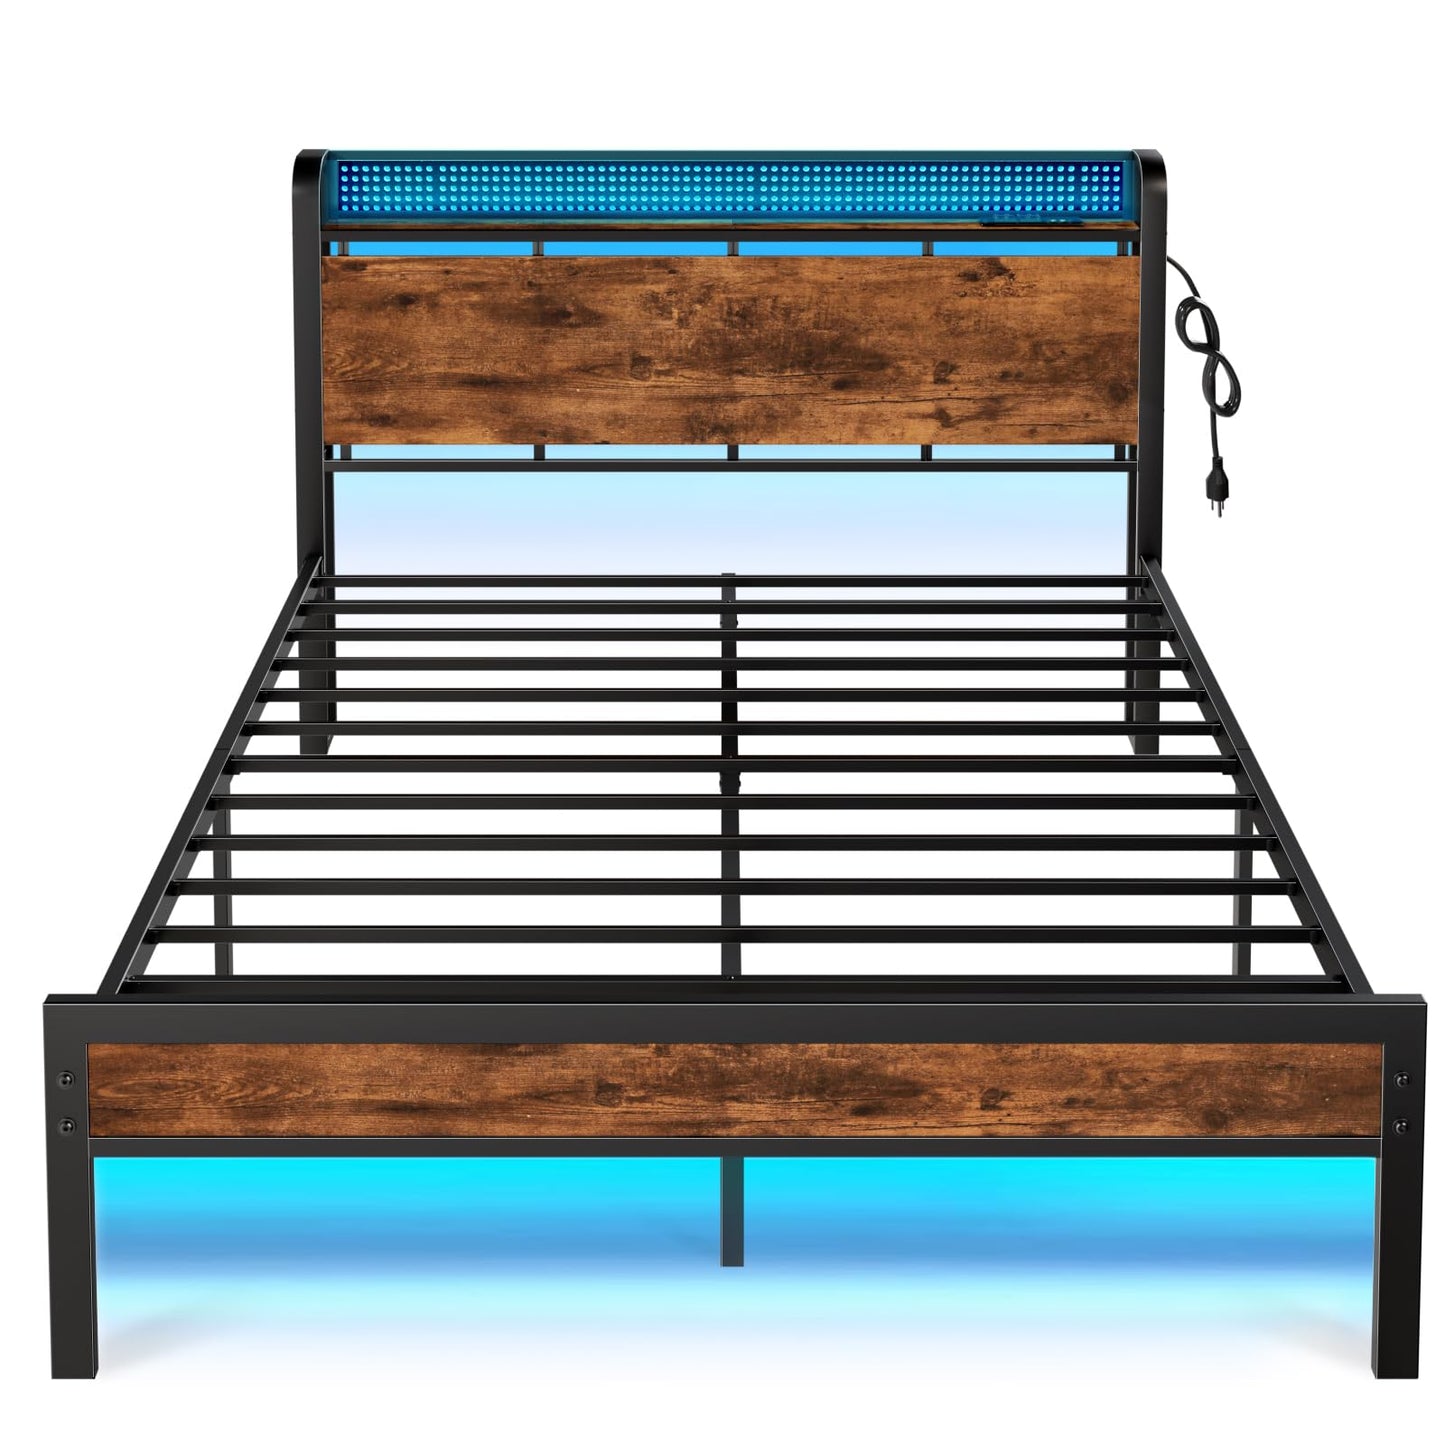 Furnulem Platform Queen Bed Frame with RGB LED Lights,Industrial Storage Headboard with Power Outlet and USB Port,Rustic Wood and Strong Metal Support,No Box Spring Needed, Noise Free